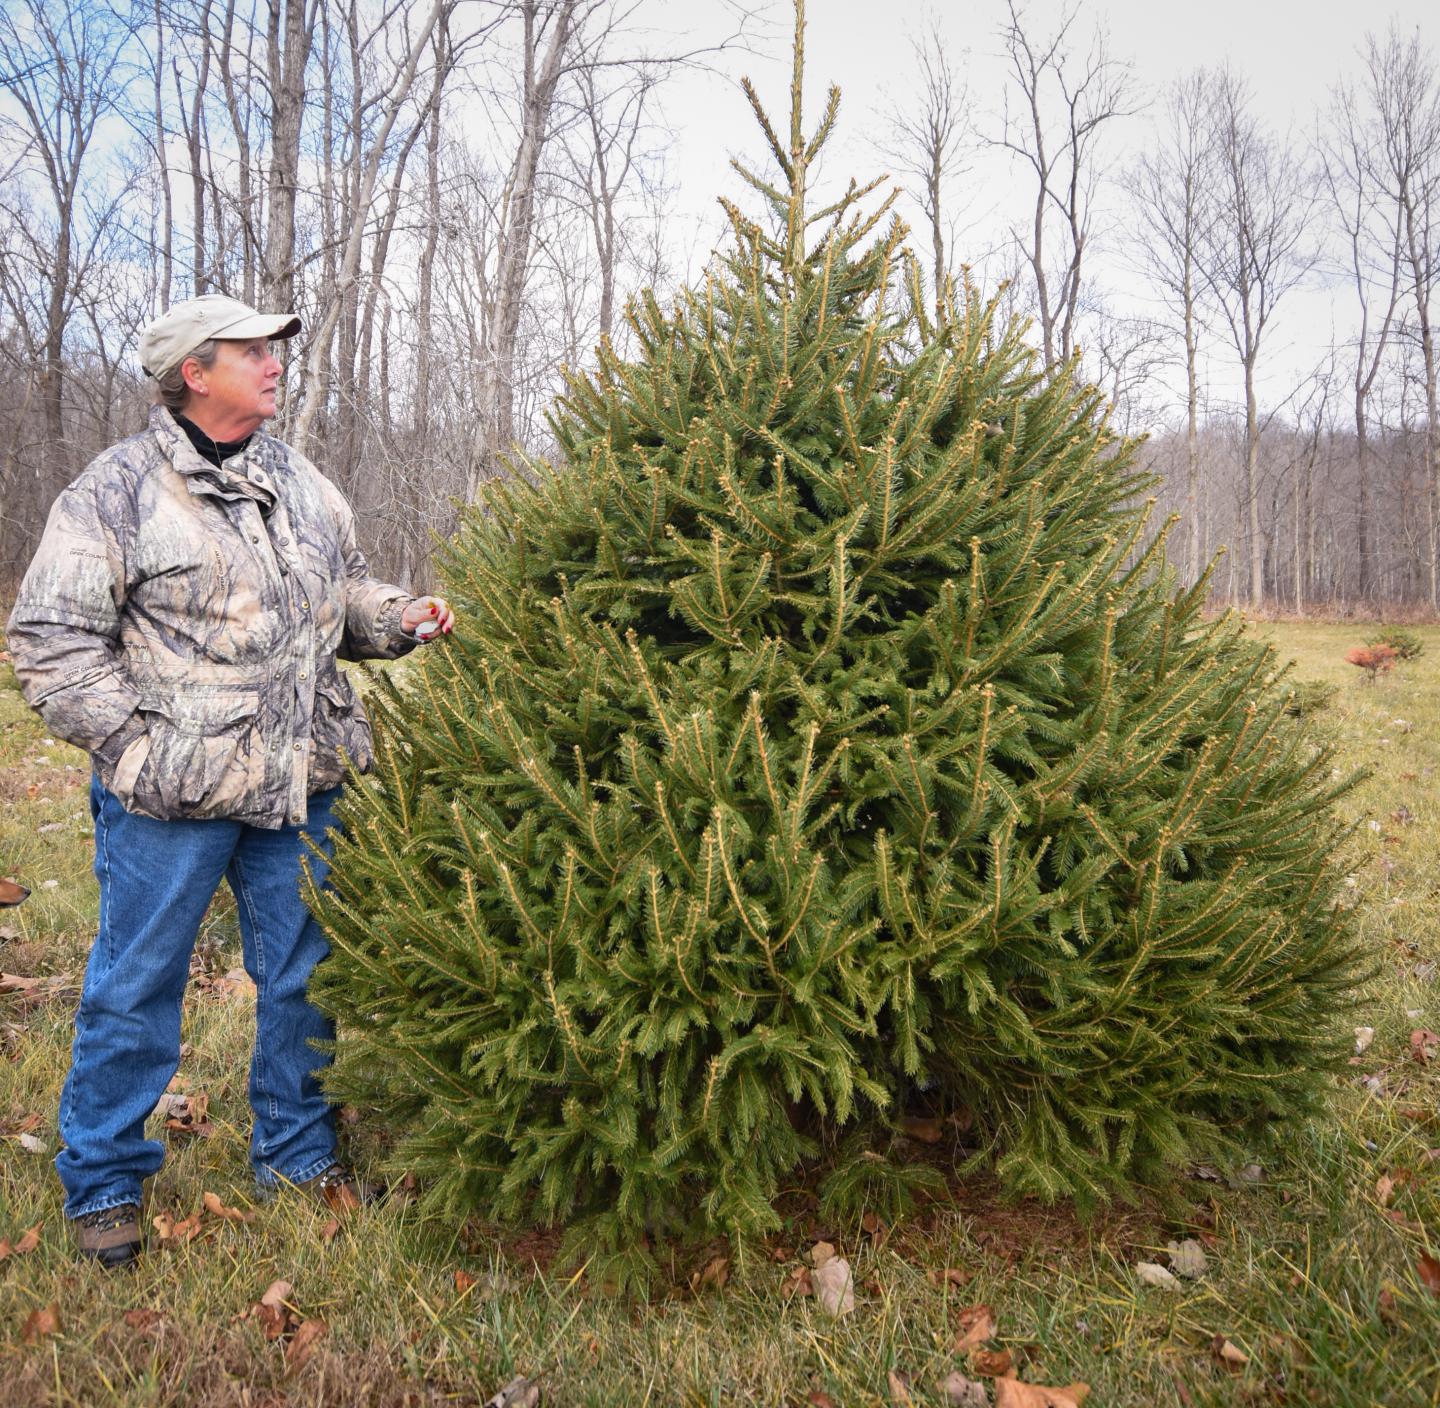 Peggy Royer, who co-owns Wagoner Christmas Tree Farm in Putnam County, Indiana, shows off a tree growing on the farm Dec. 14, 2020. 